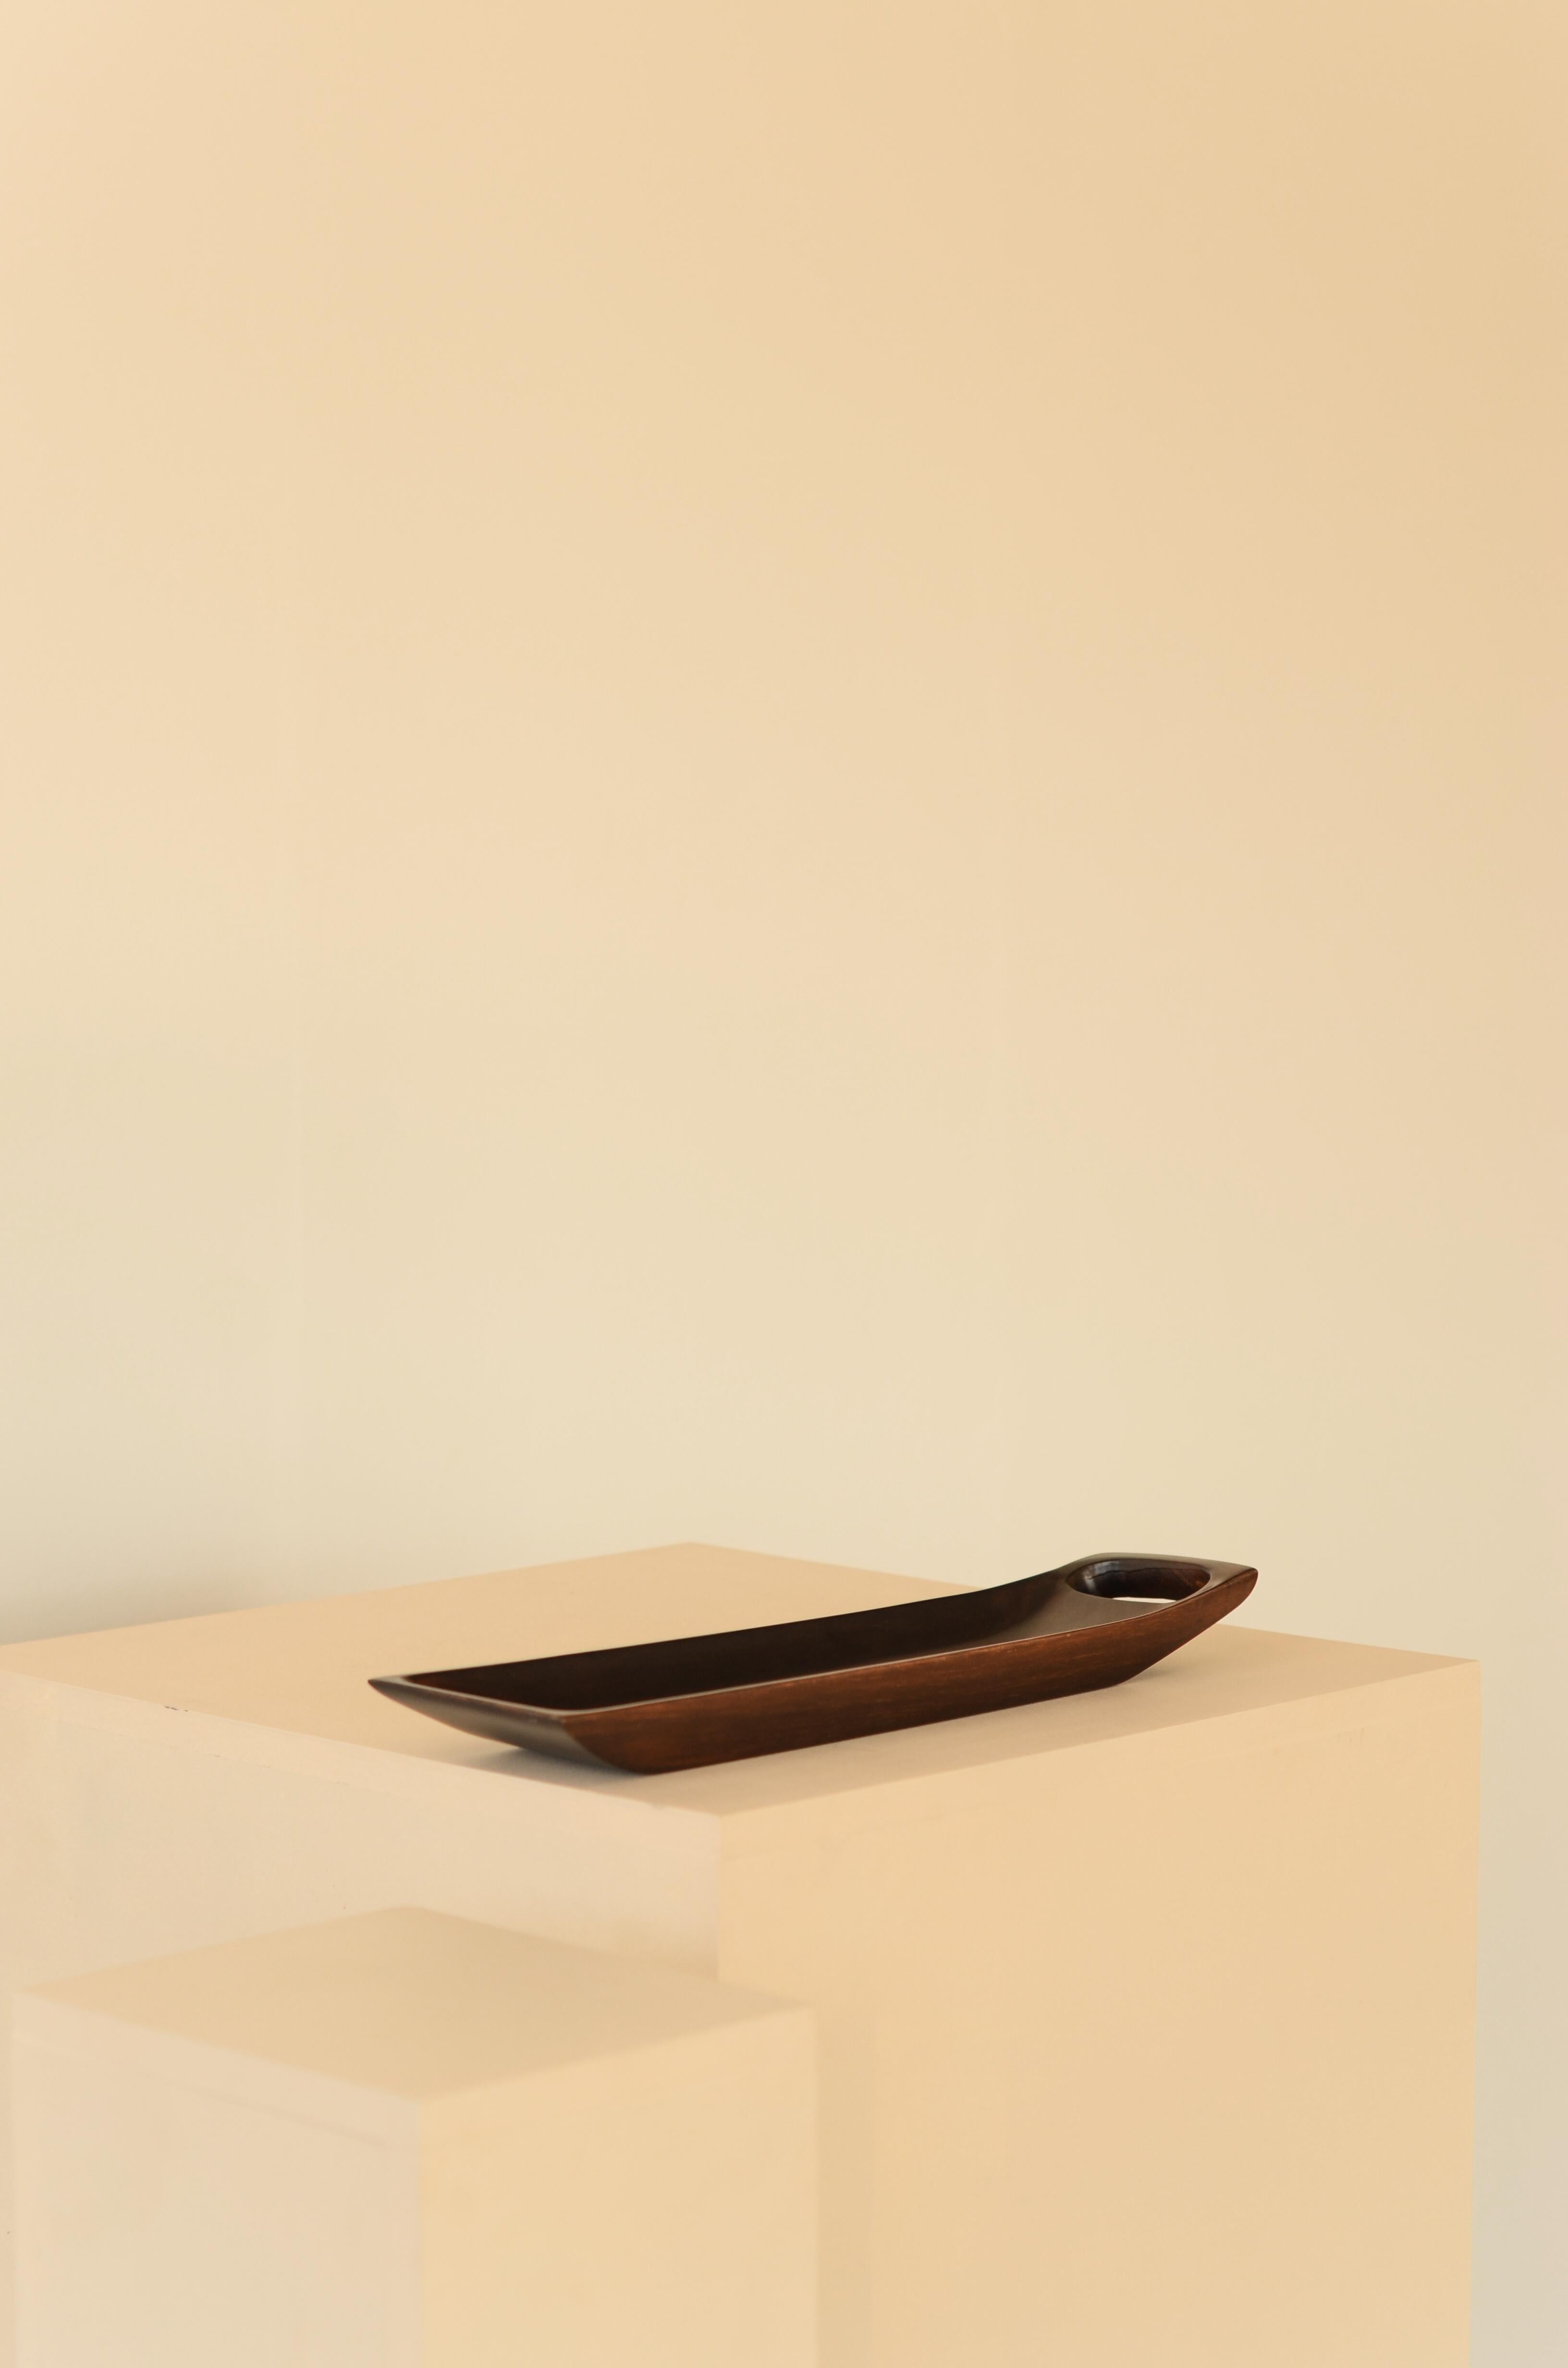 Rare and beautiful tray with handle carved in Brazilian rosewood model 506 from the WoodArt catalogue.

Jean Gillon (1919-2007) was born in Romania, where he graduated in Architecture and Fine Arts. In 1956 he moved to Brazil, where he developed an